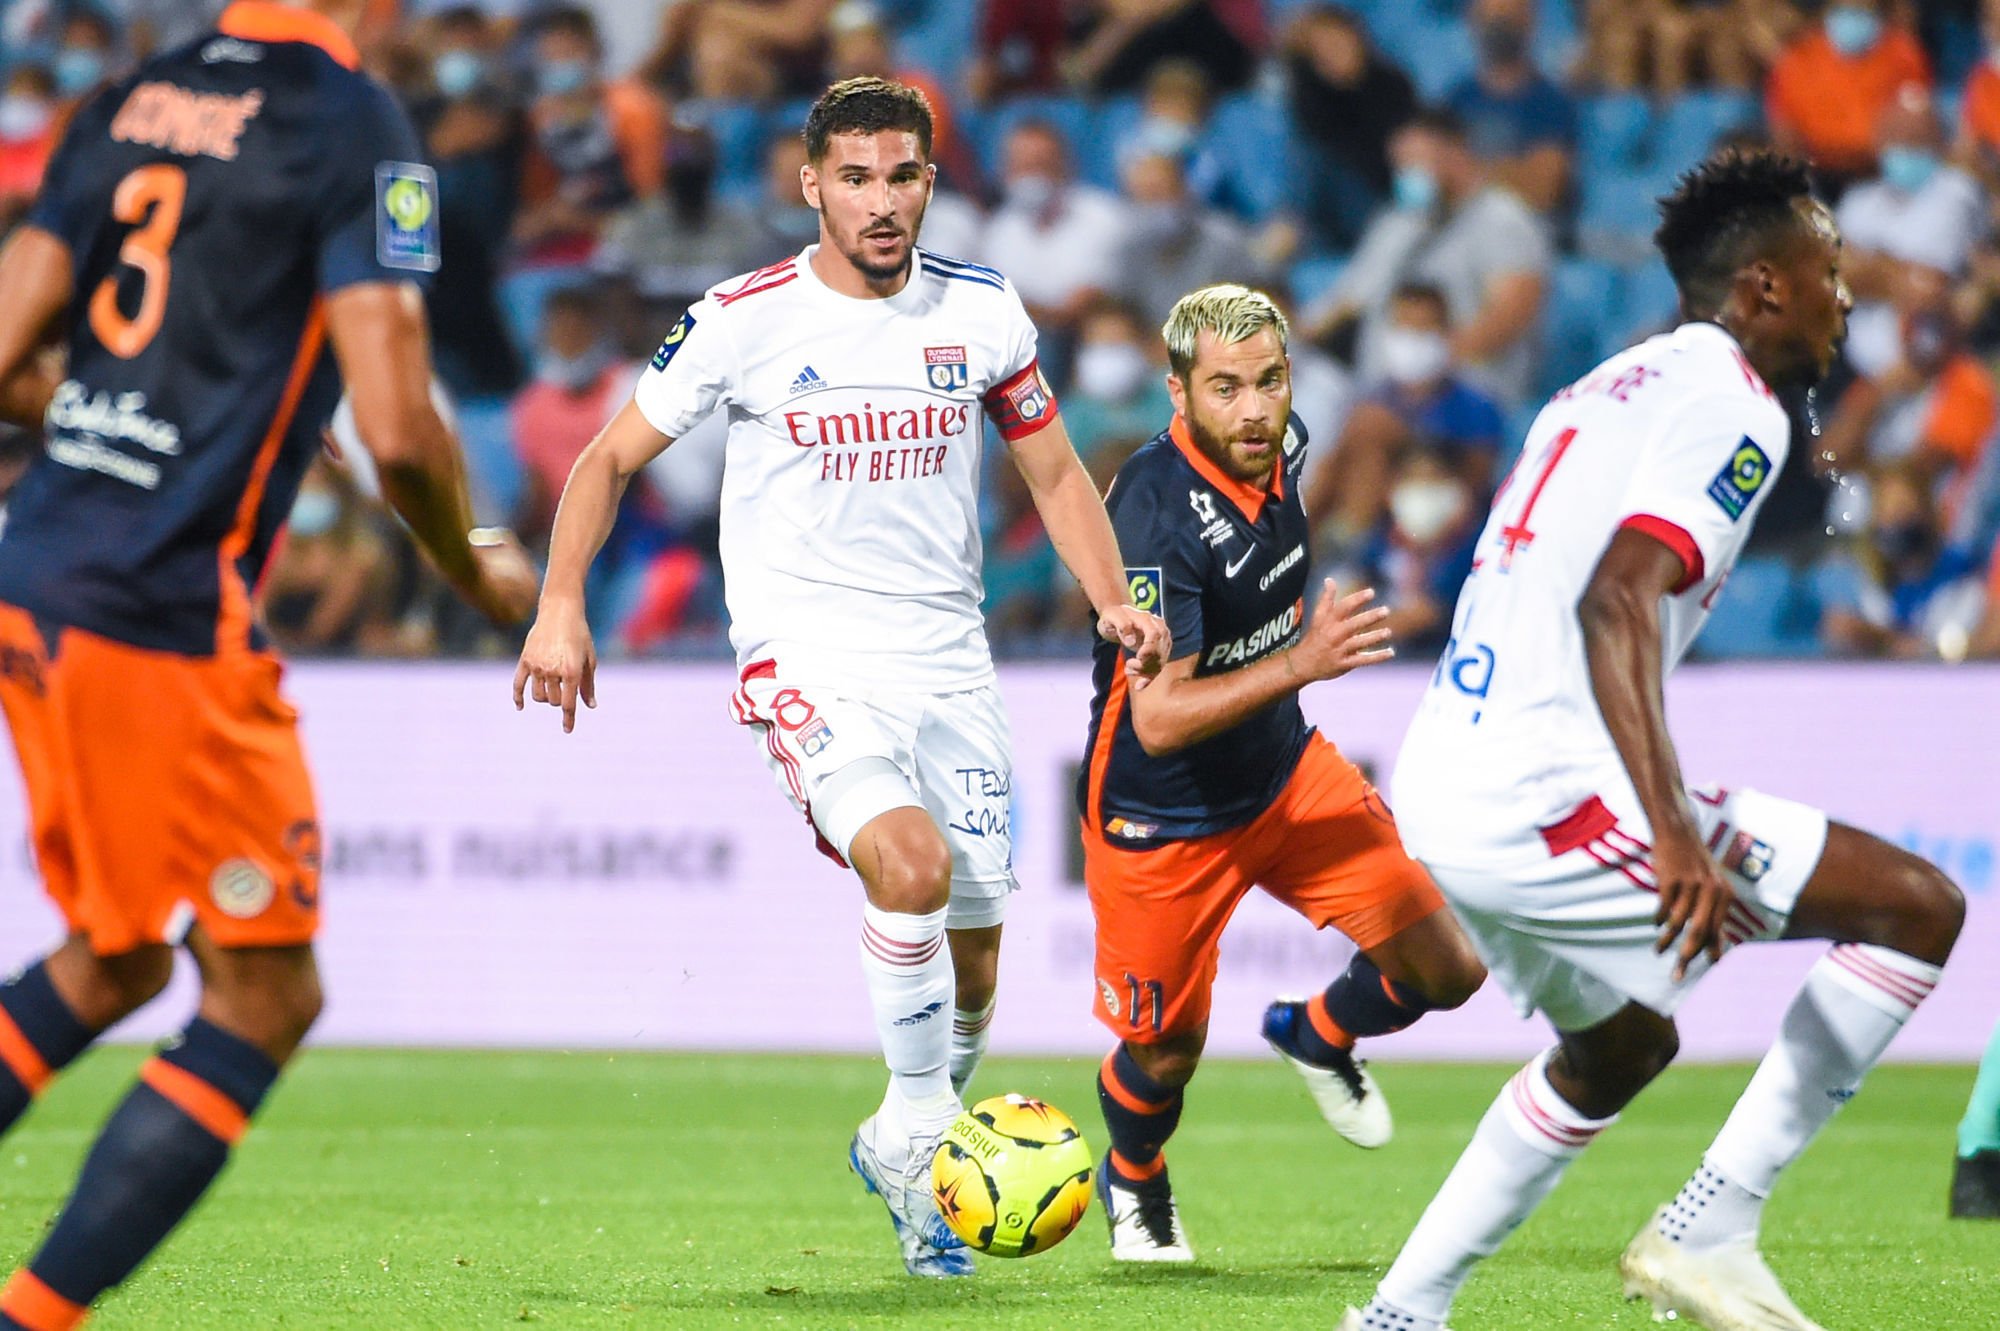 Houssem AOUAR of Lyon and Teji SAVANIER of Montpellier  during the Ligue 1 match between Montpellier and Lyon at Stade de la Mosson on September 15, 2020 in Montpellier, France. (Photo by Alexandre Dimou/Icon Sport) - Houssem AOUAR - Teji SAVANIER - Stade de la Mosson - Montpellier (France)